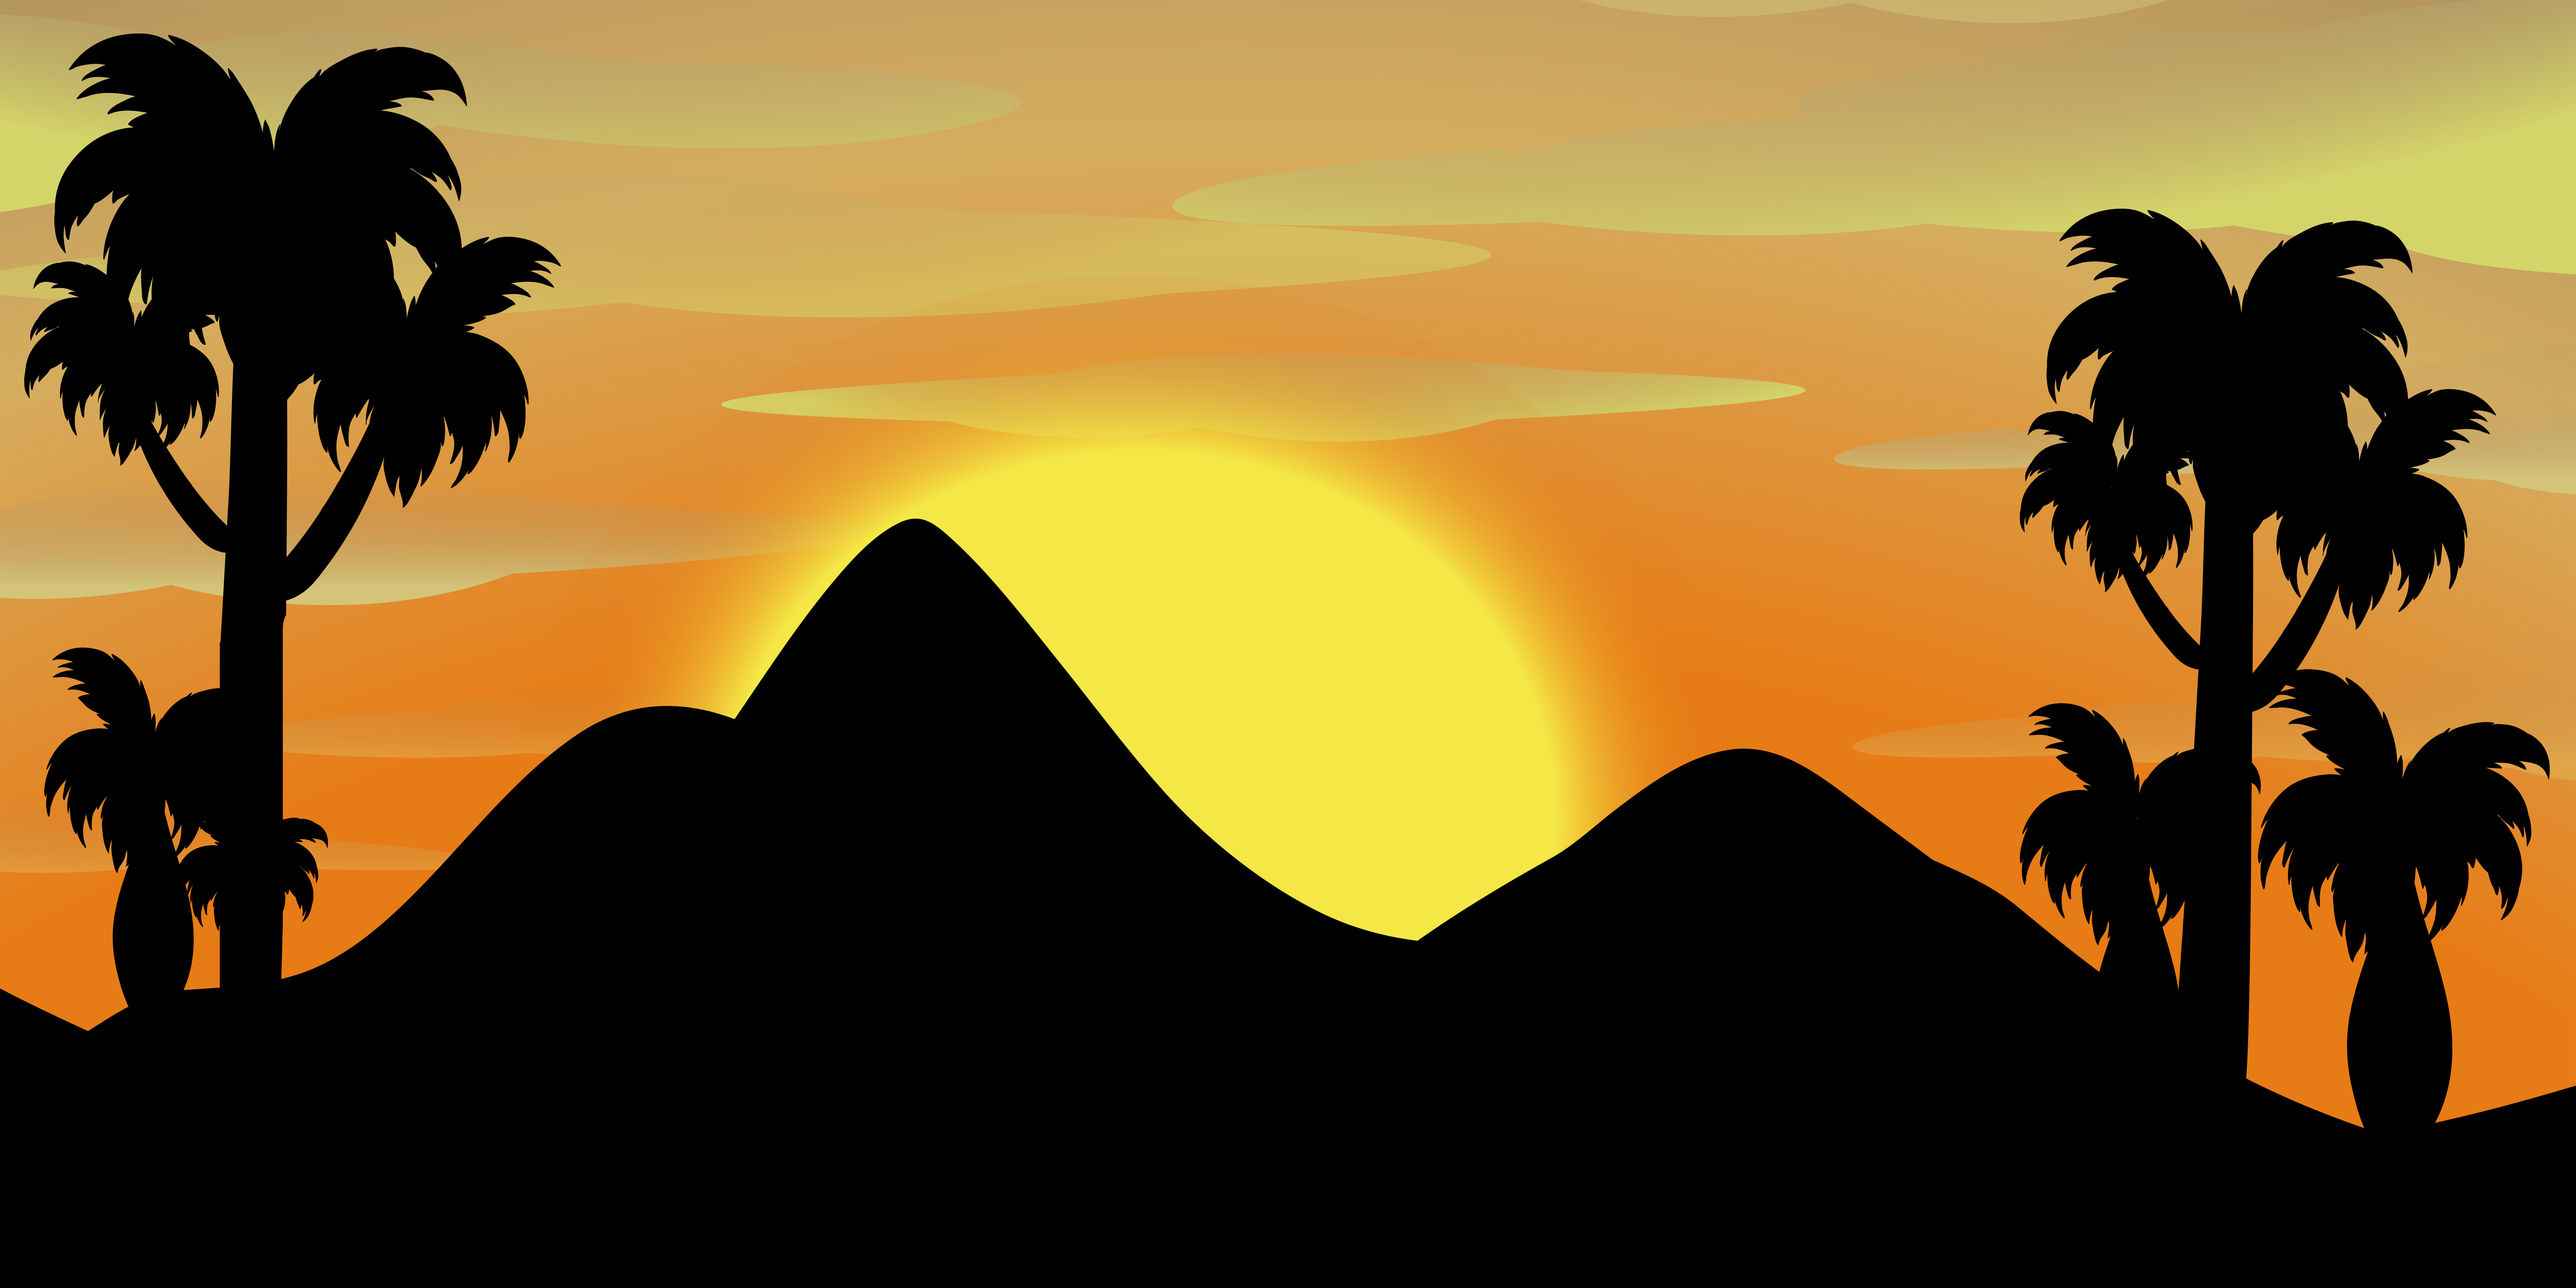 Silhouette Scene Of Mountains At Sunset 414750 Vector Art At Vecteezy